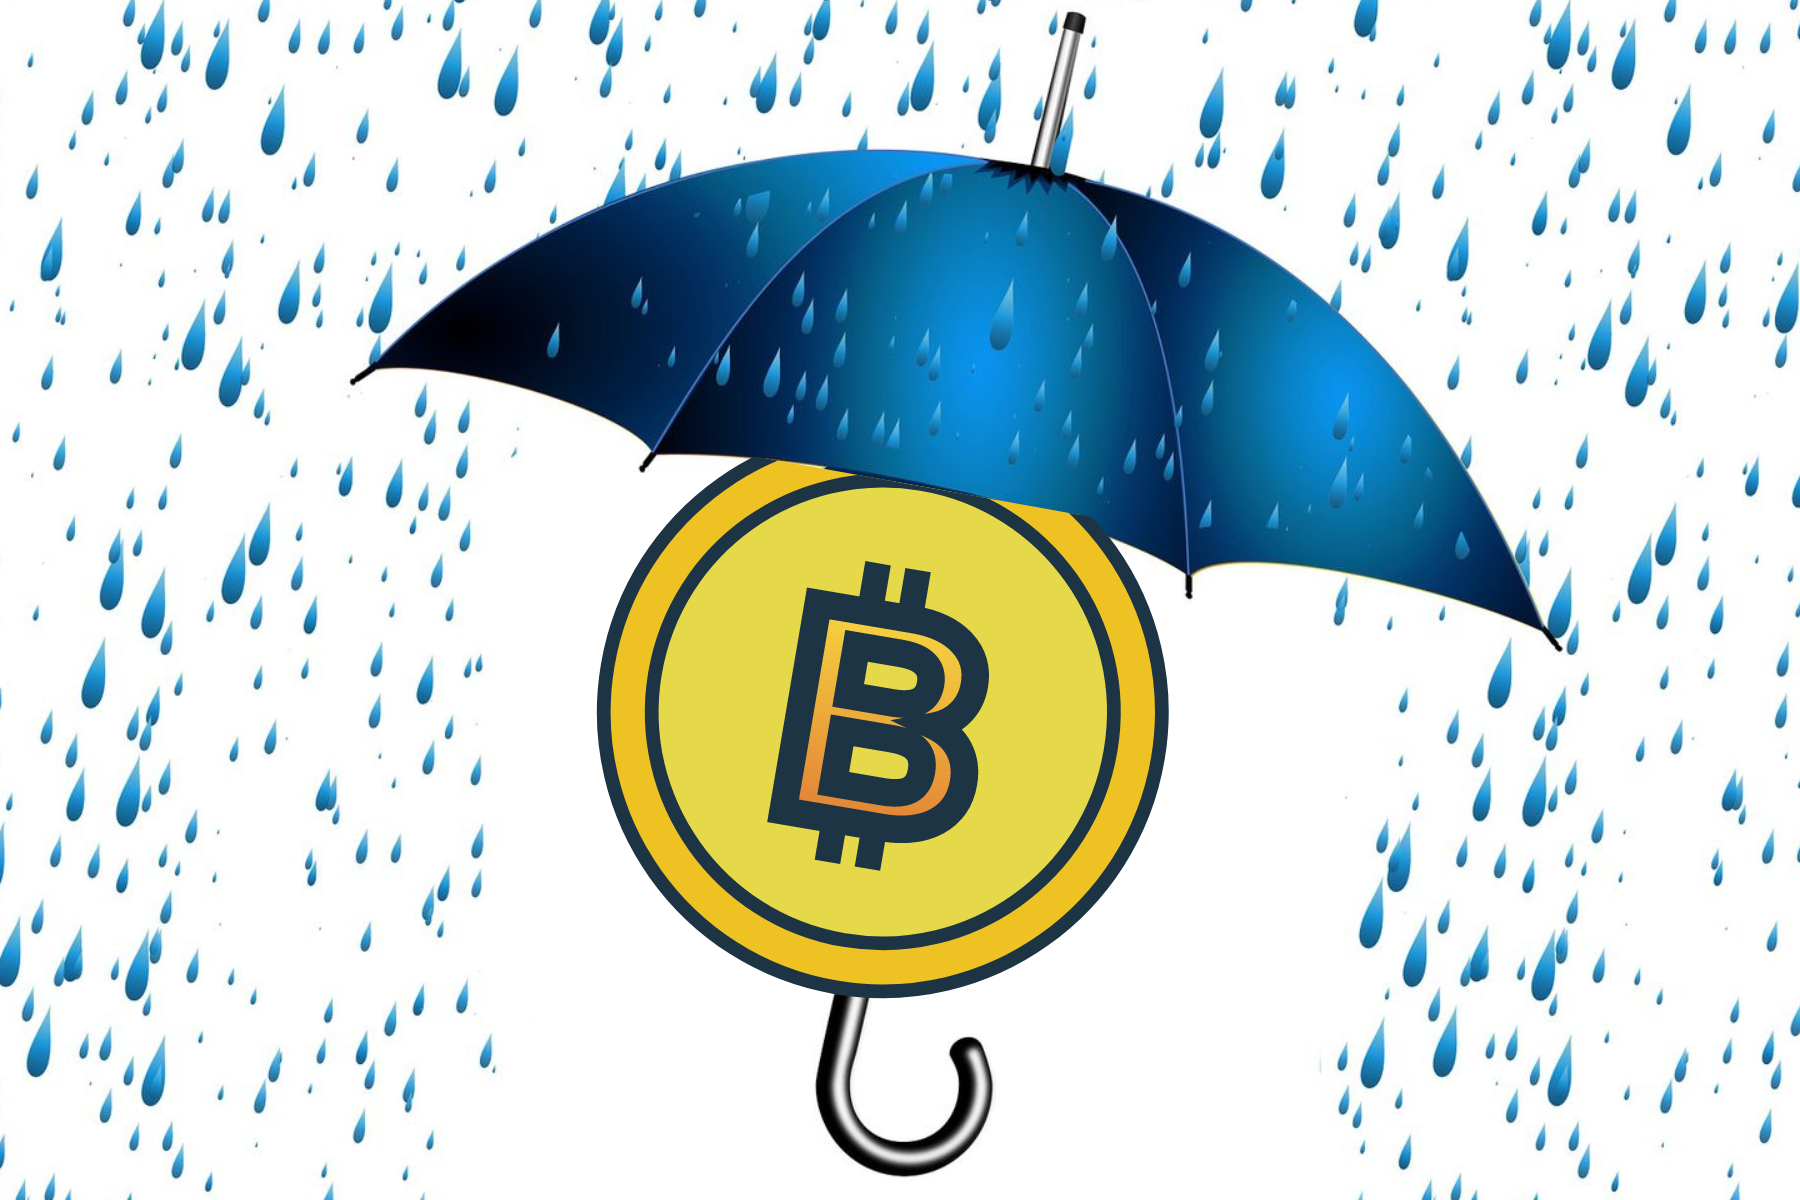 A Bitcoin protected by an umbrella from the rain